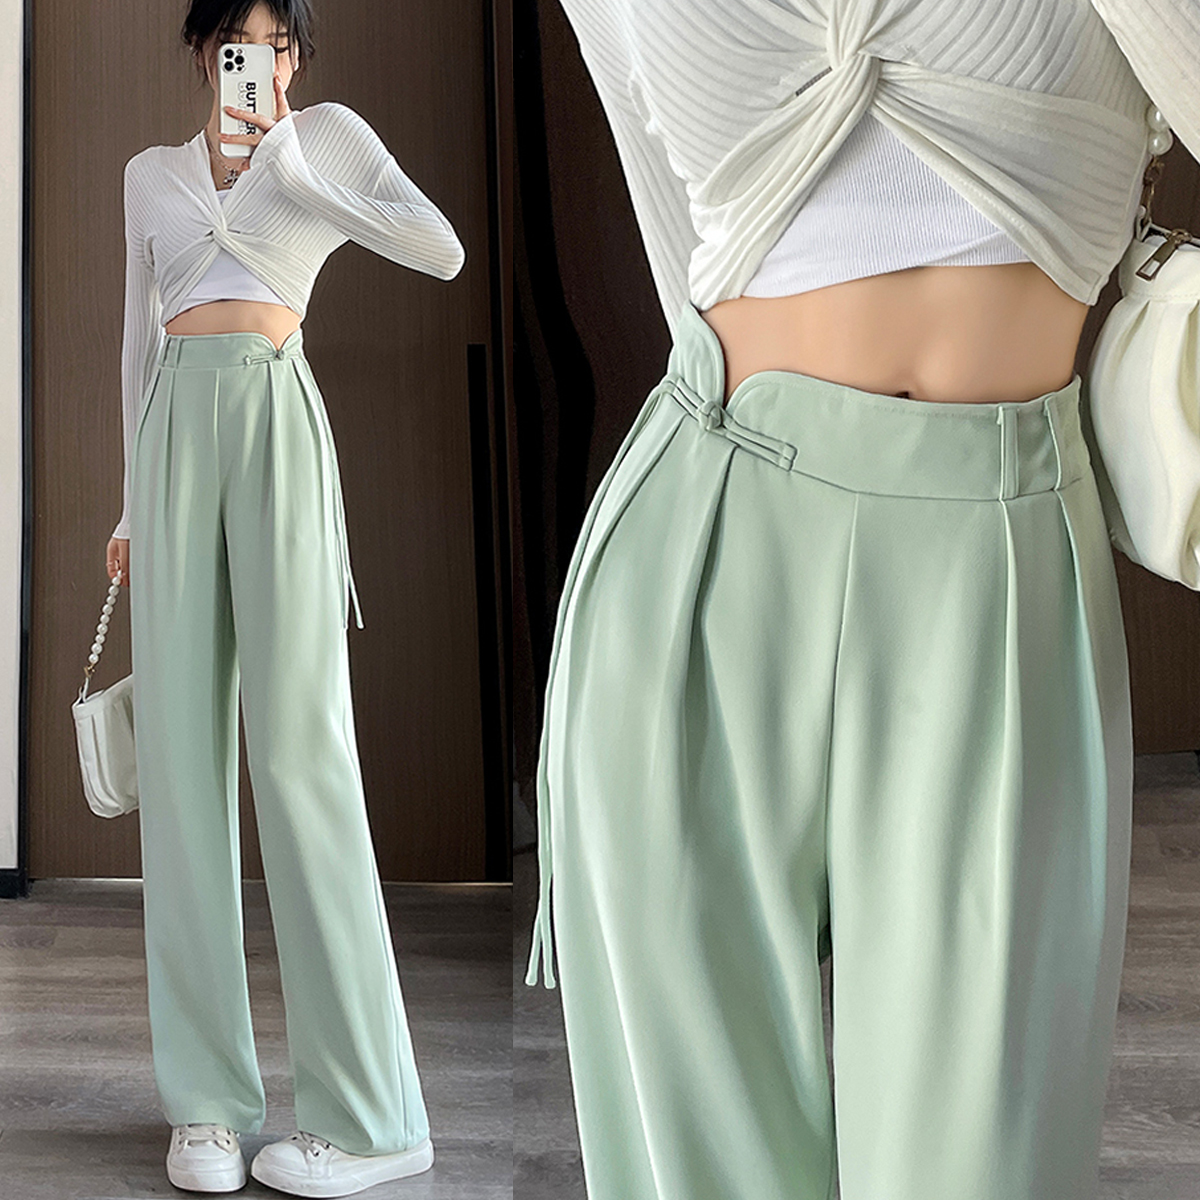 Buy Chinese Blue Trousers, Summer Trousers, Yoga Pant, Yoga Pant, Home Pant,wide  Leg Pants, Women Linen Pants, Blue Pant Online in India - Etsy